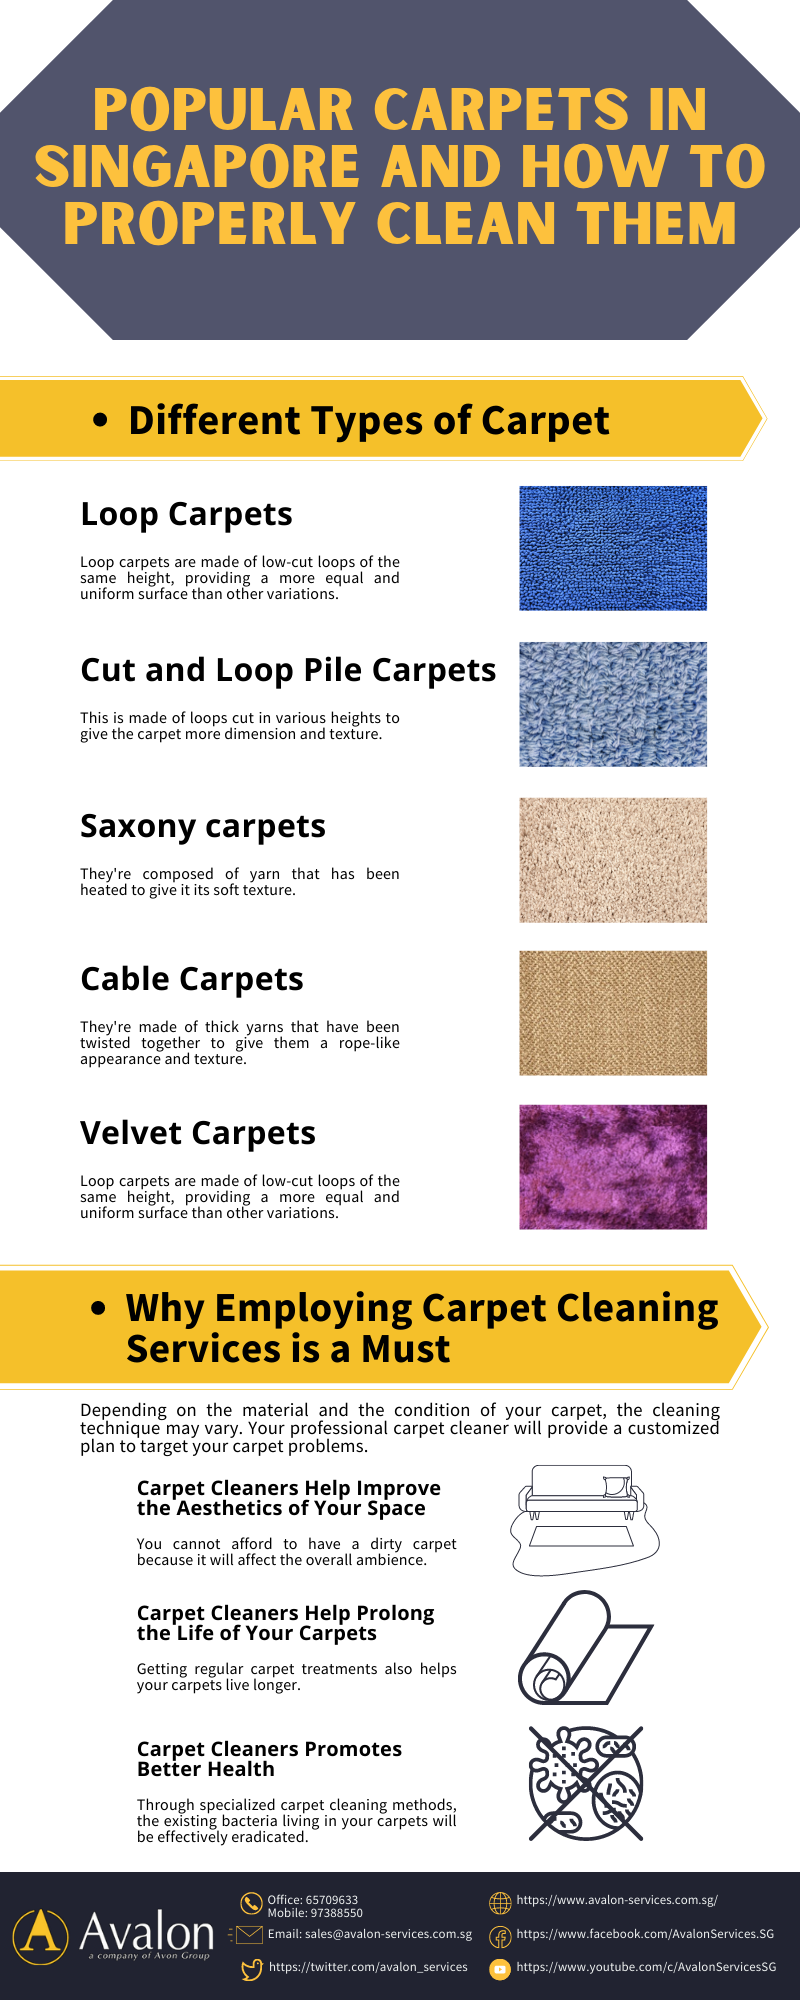 Popular Carpets in Singapore and How to Properly Clean Them